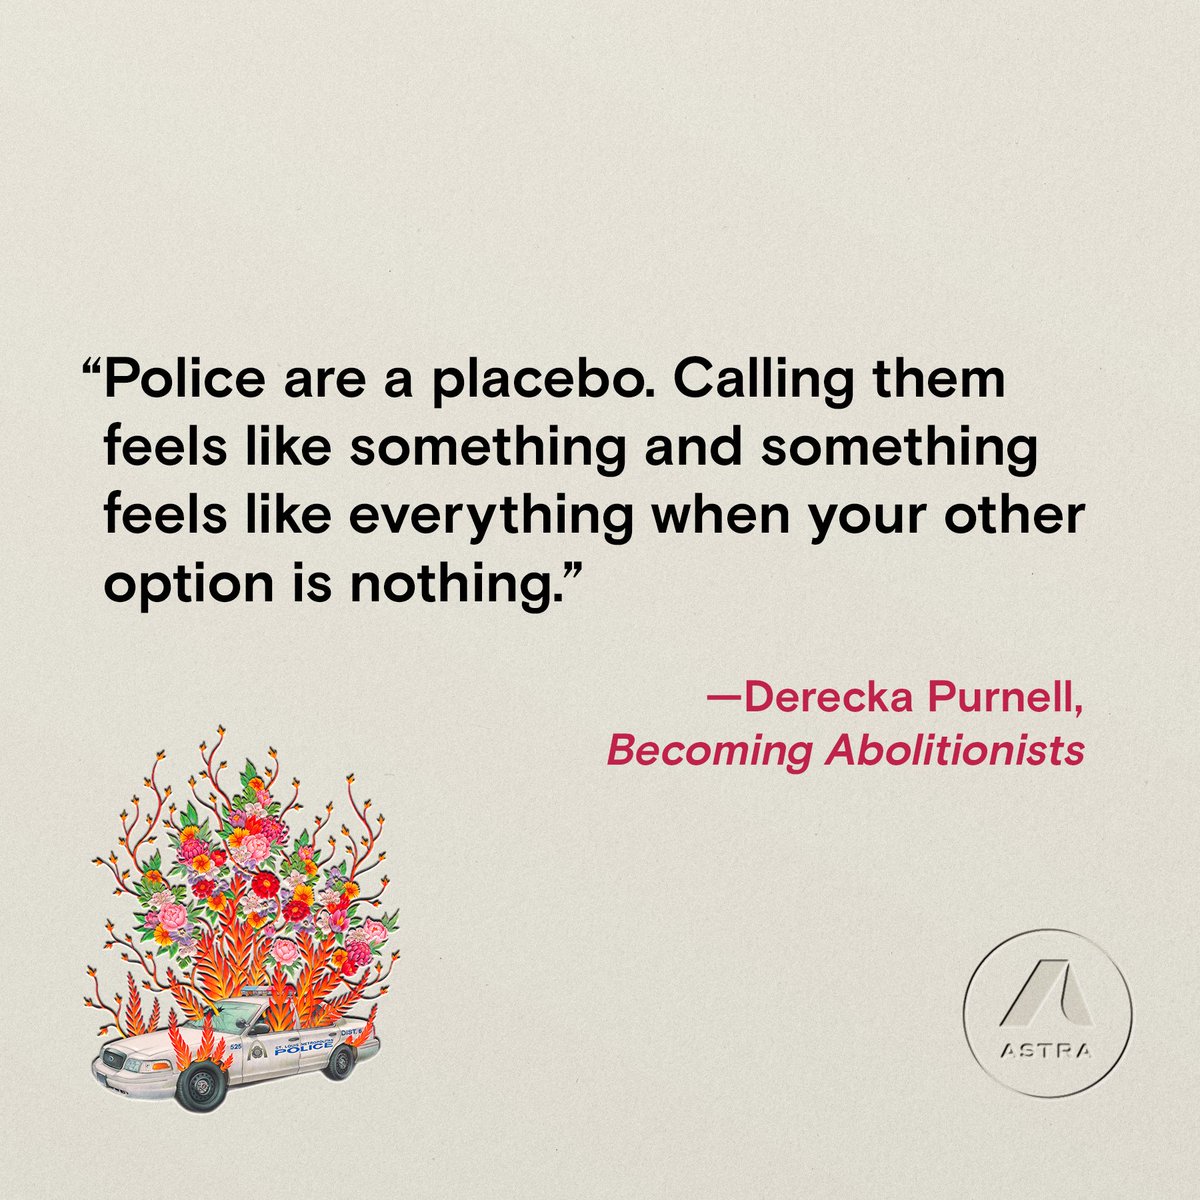 Are you curious about police abolition? Want to learn more about systemic oppression? Derecka Purnell's BECOMING ABOLITIONISTS, out now in paperback, is a great place to start. Here is a sampling of quotes from the book that really stuck with us.